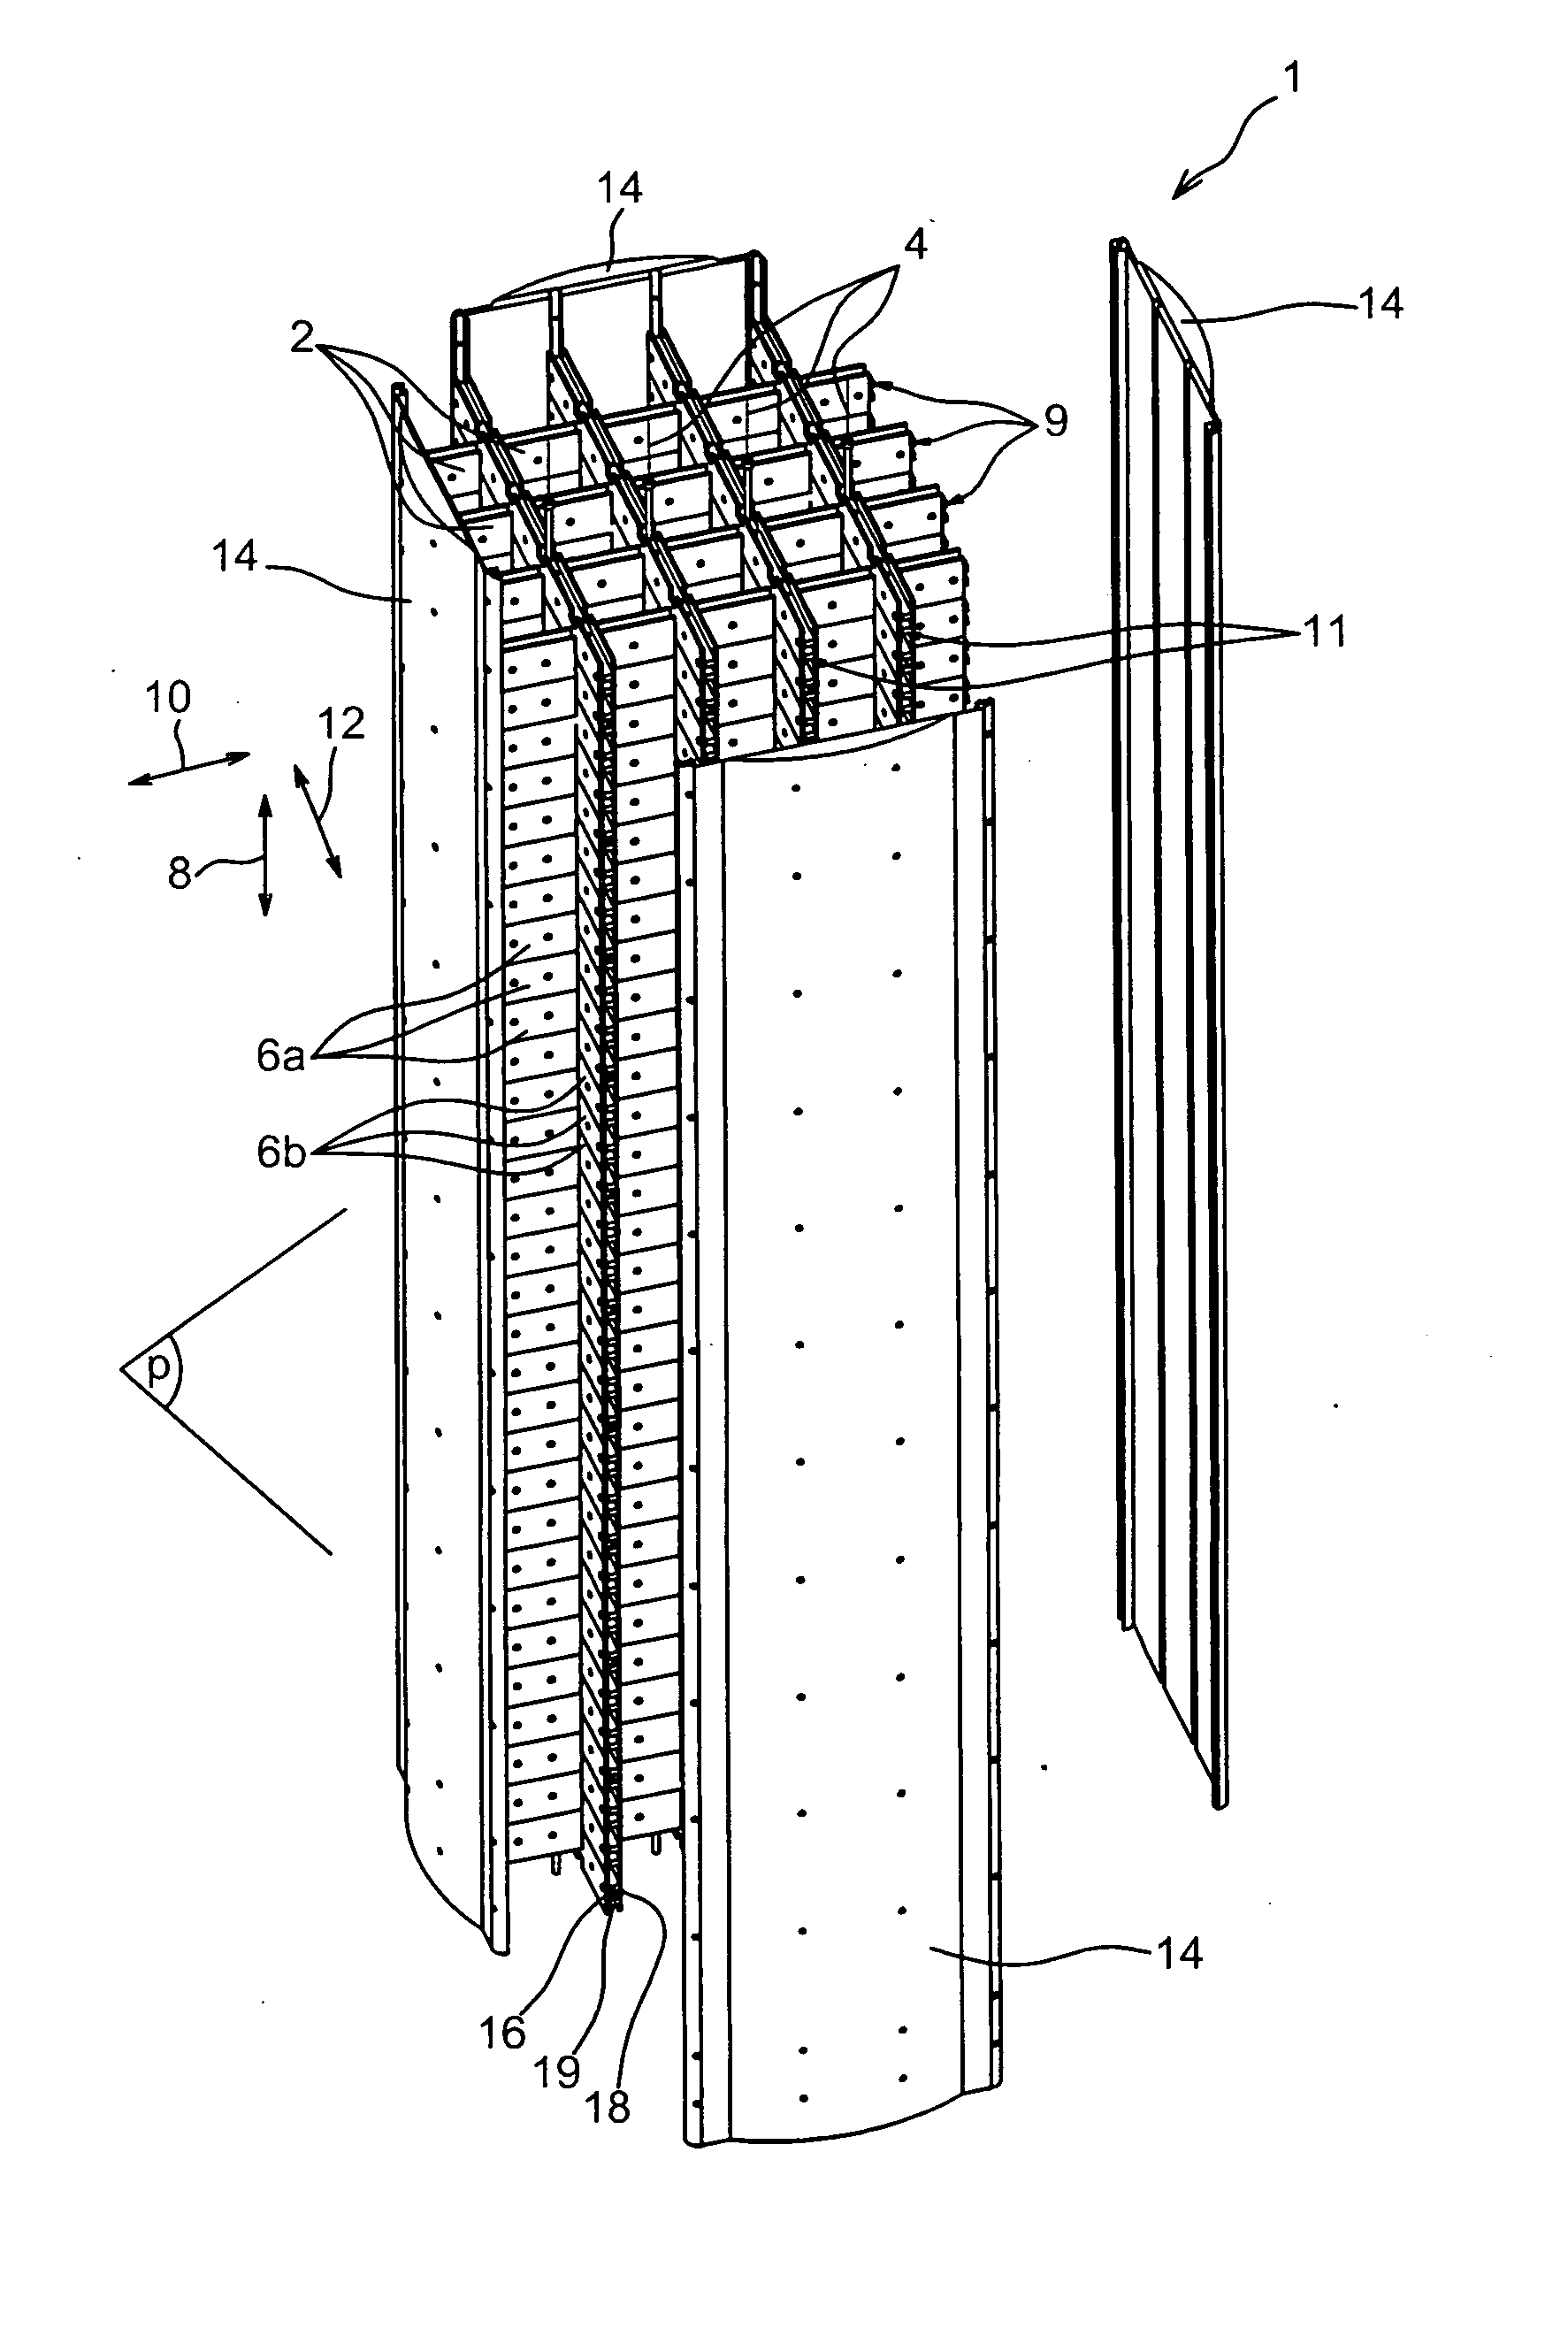 Storage Device For Storing and Transporting Nuclear Fuel Assemblies